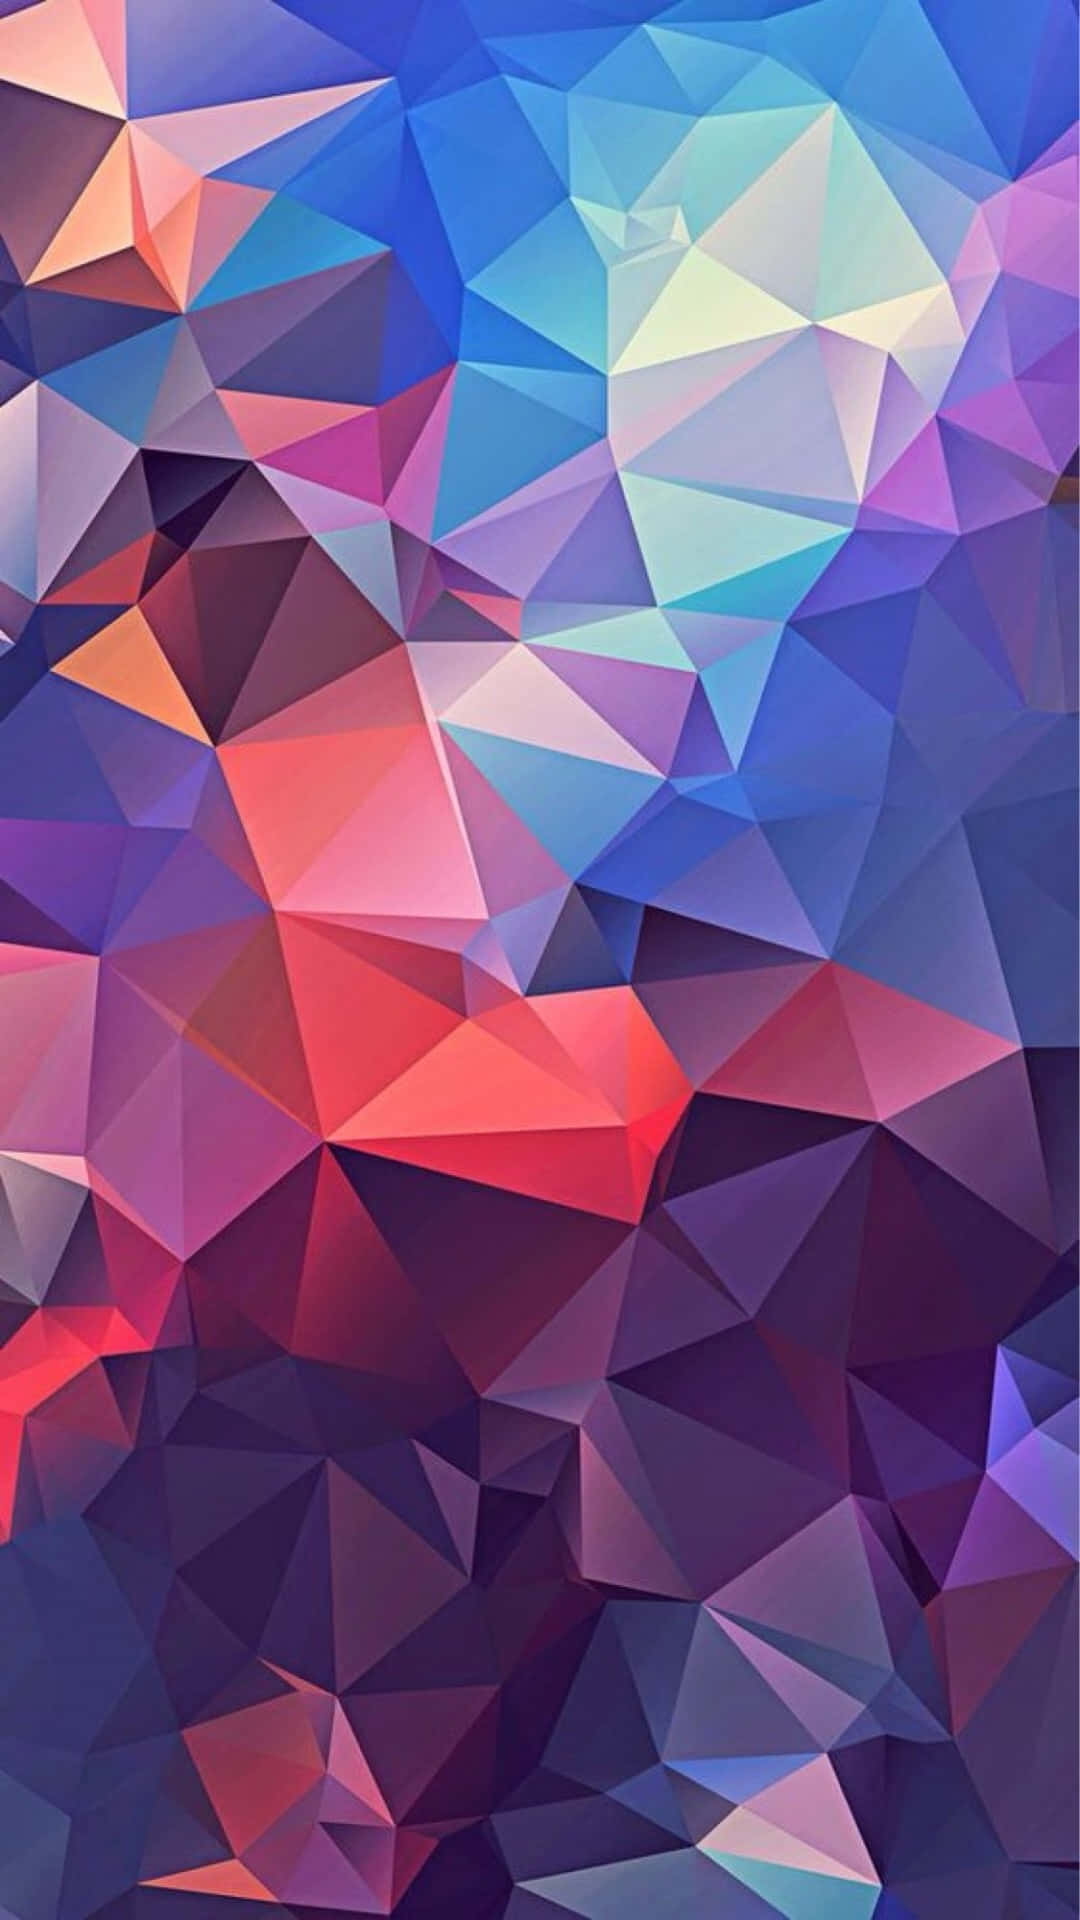 Geometric abstract pattern on iPhone Wallpaper